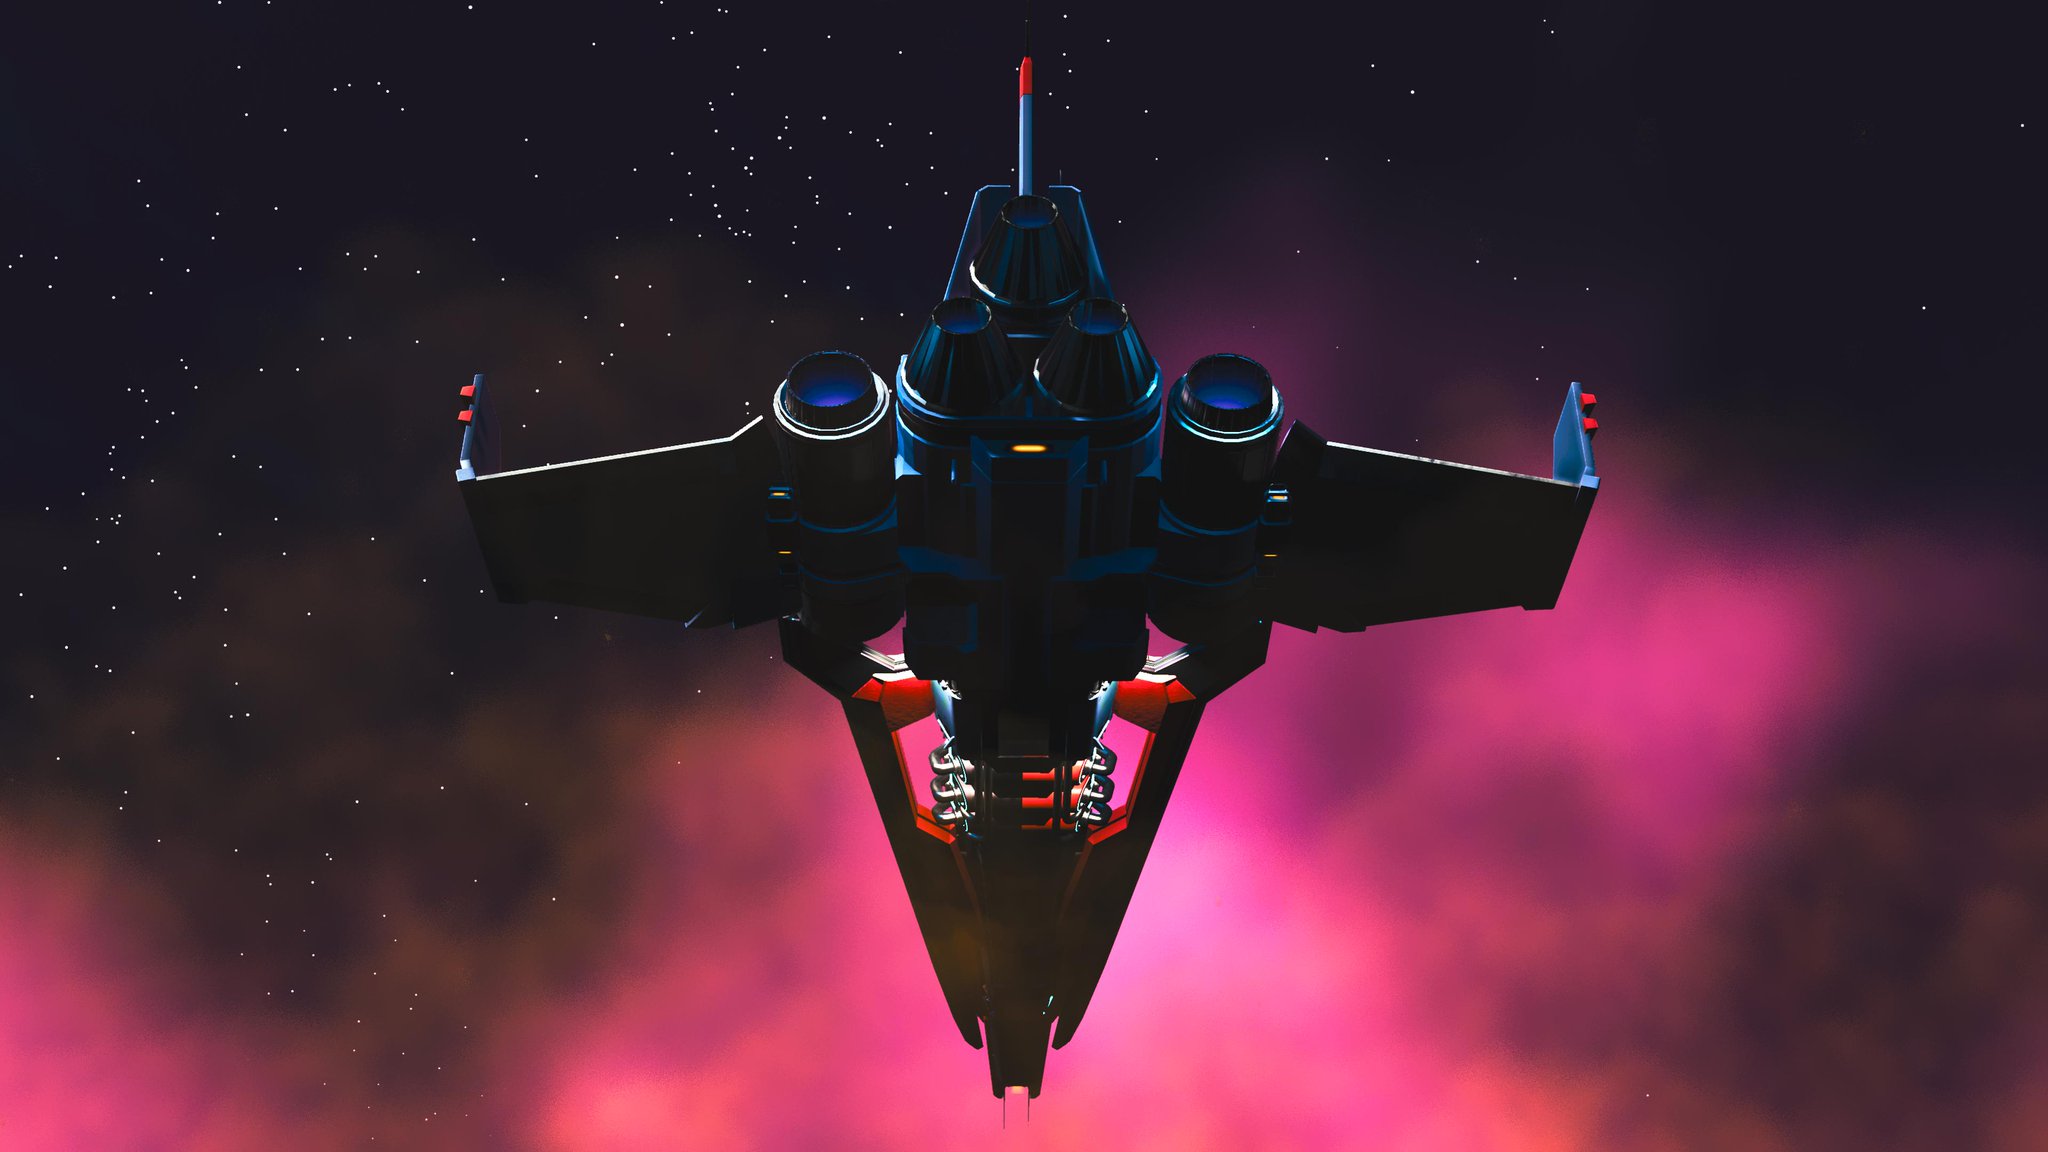 A moody shot of a spaceship from the rear, set against a red and purple nebula